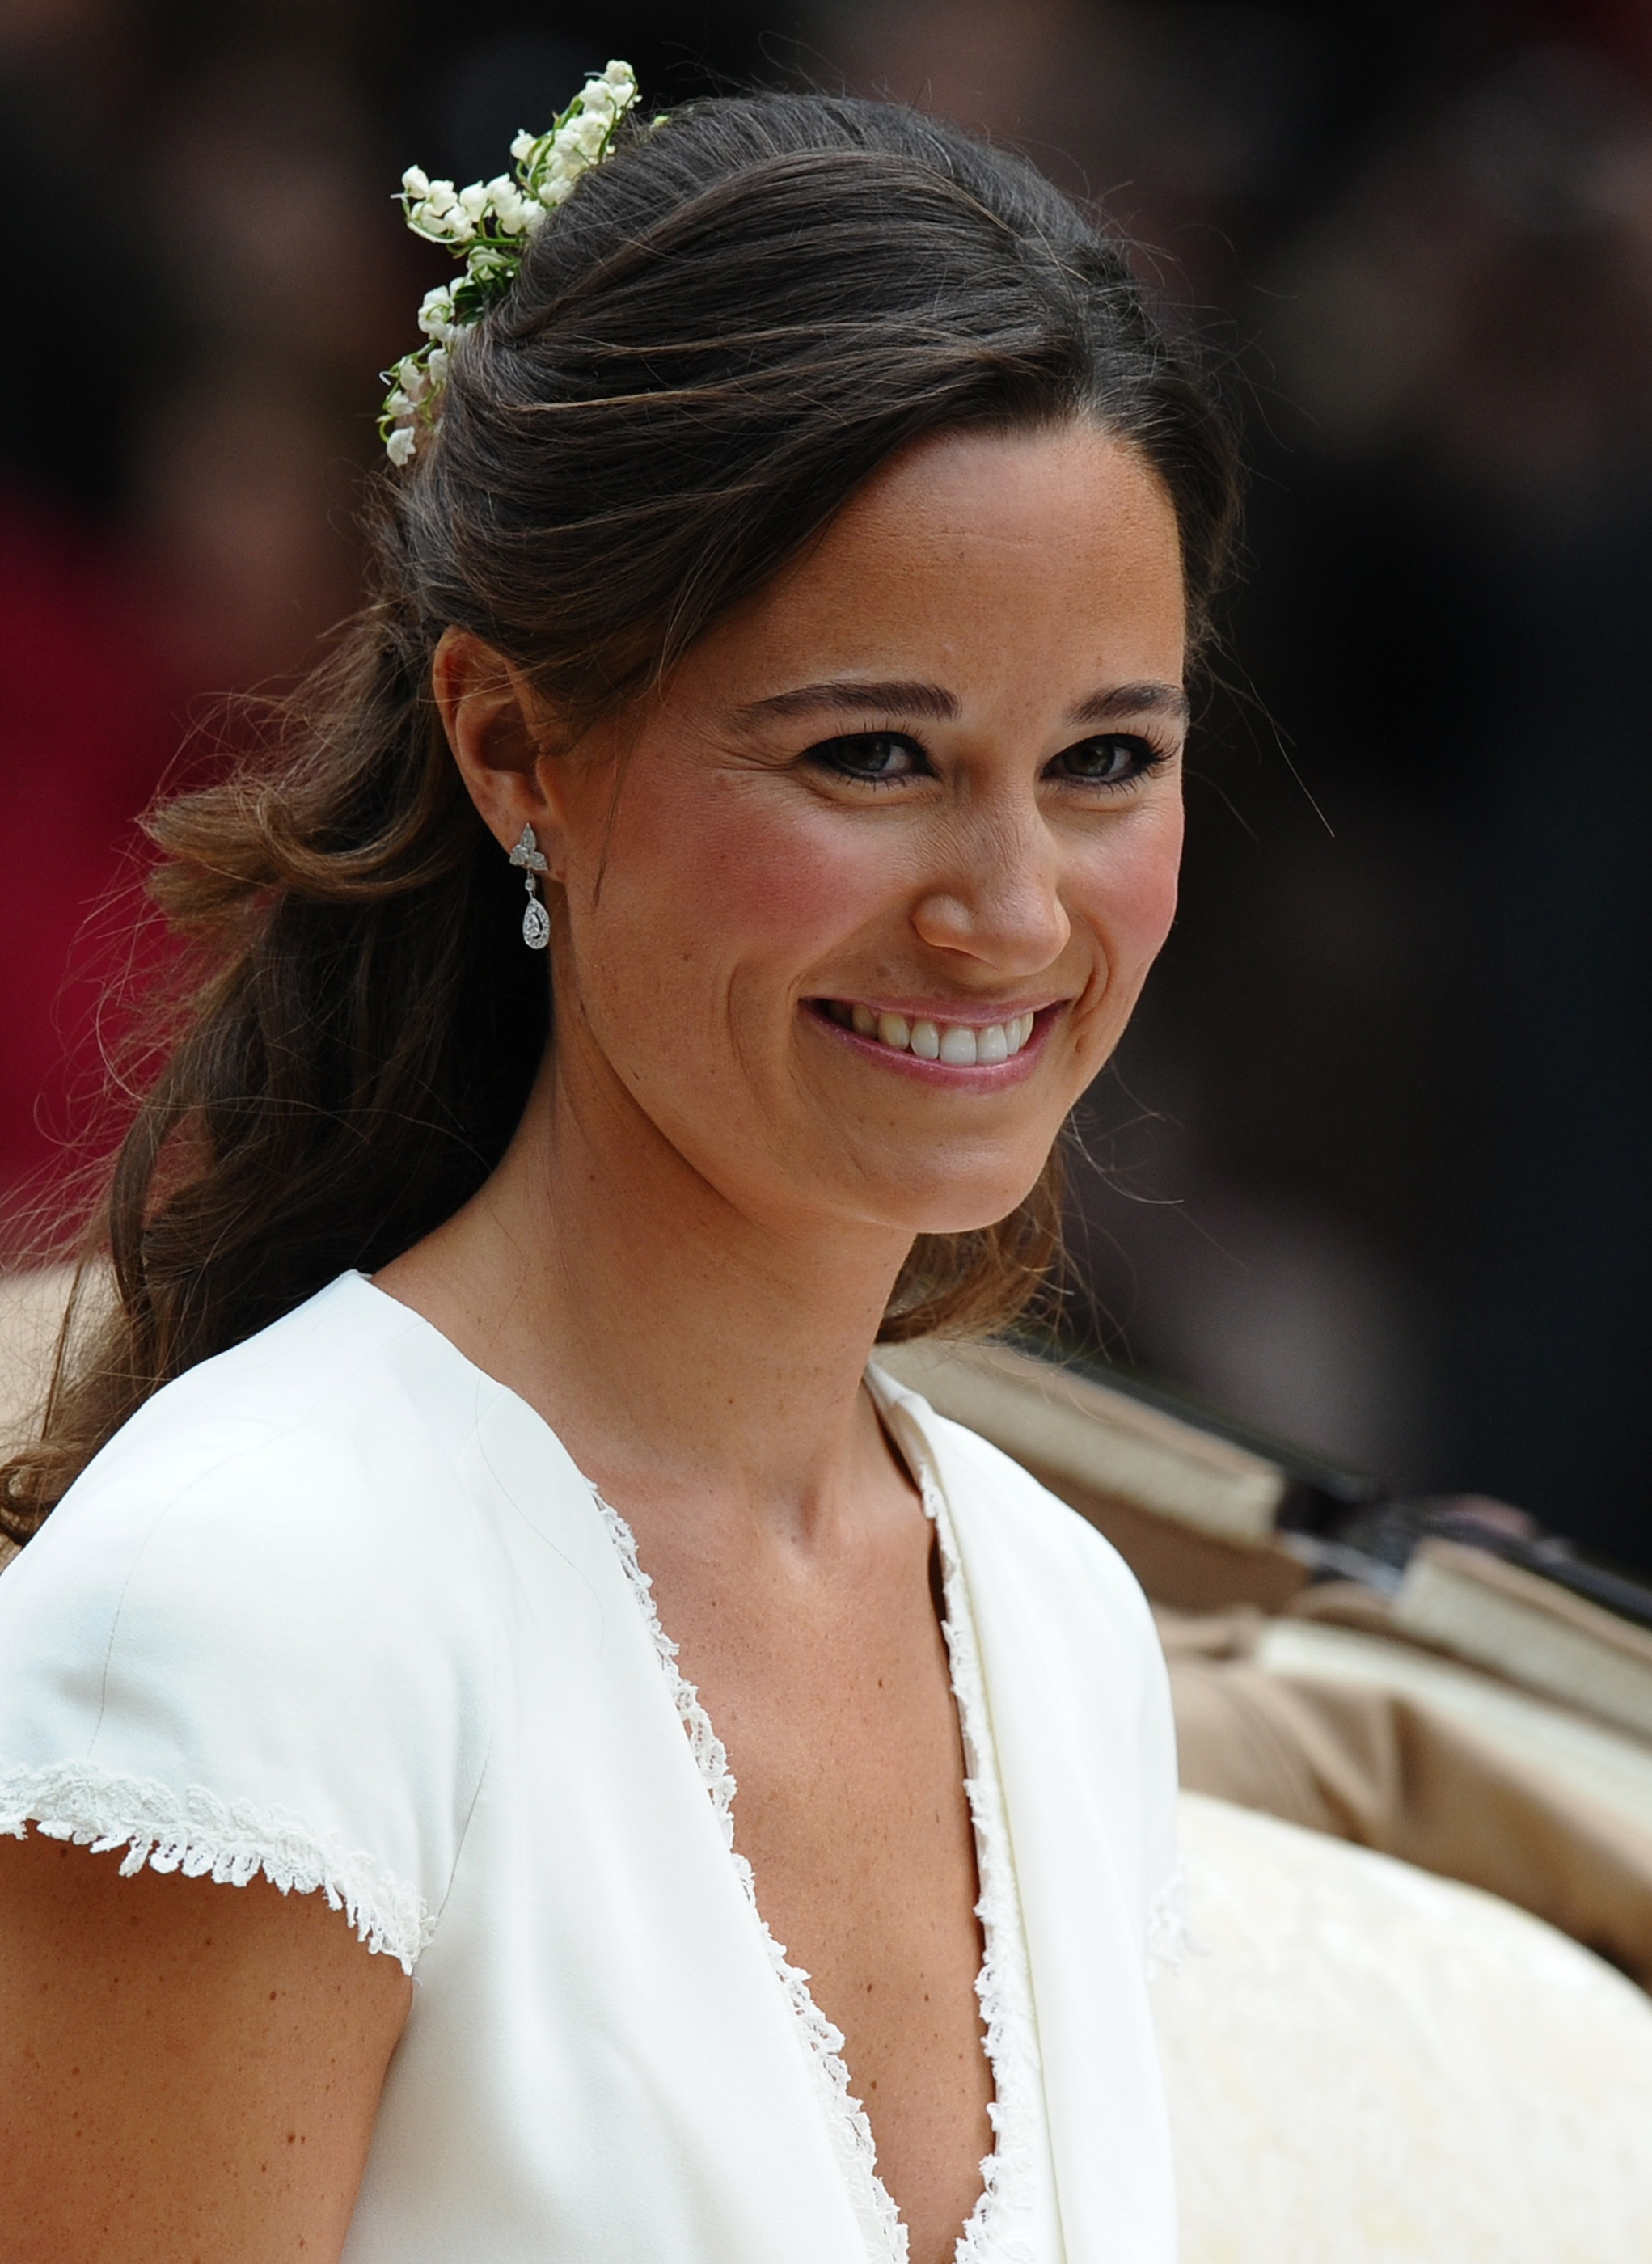 Pippa Middleton at the wedding of the Prince and Princess of Wales in London in 2011 | Source: Getty Images